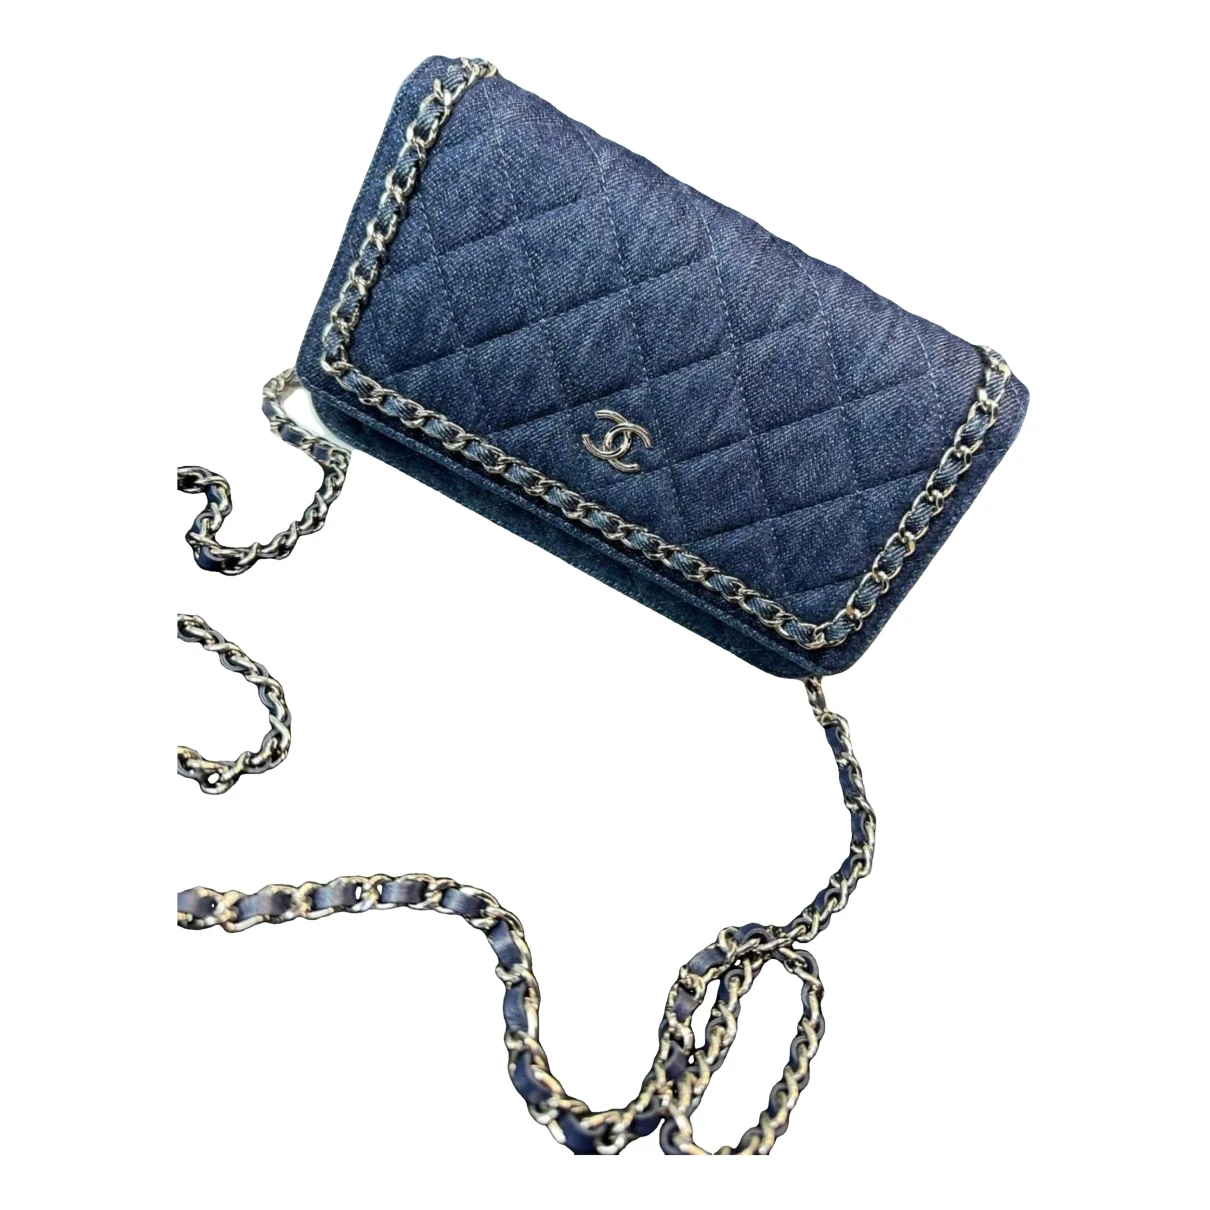 bags Chanel handbags Wallet On Chain Timeless/Classique for Female Denim - Jeans. Used condition